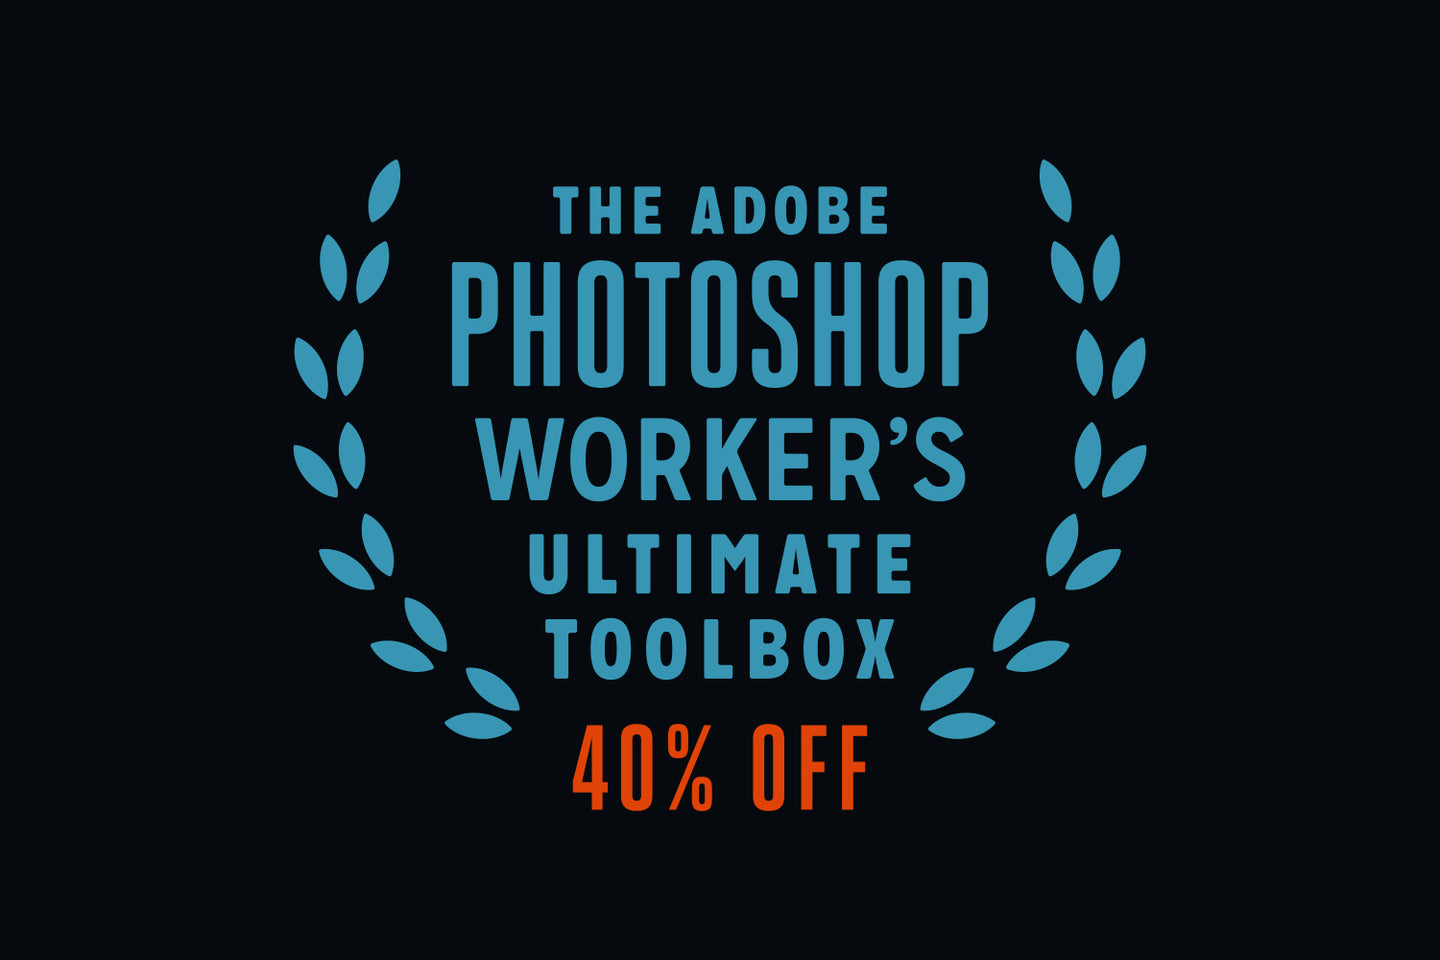 The Photoshop Worker's Ultimate Toolbox